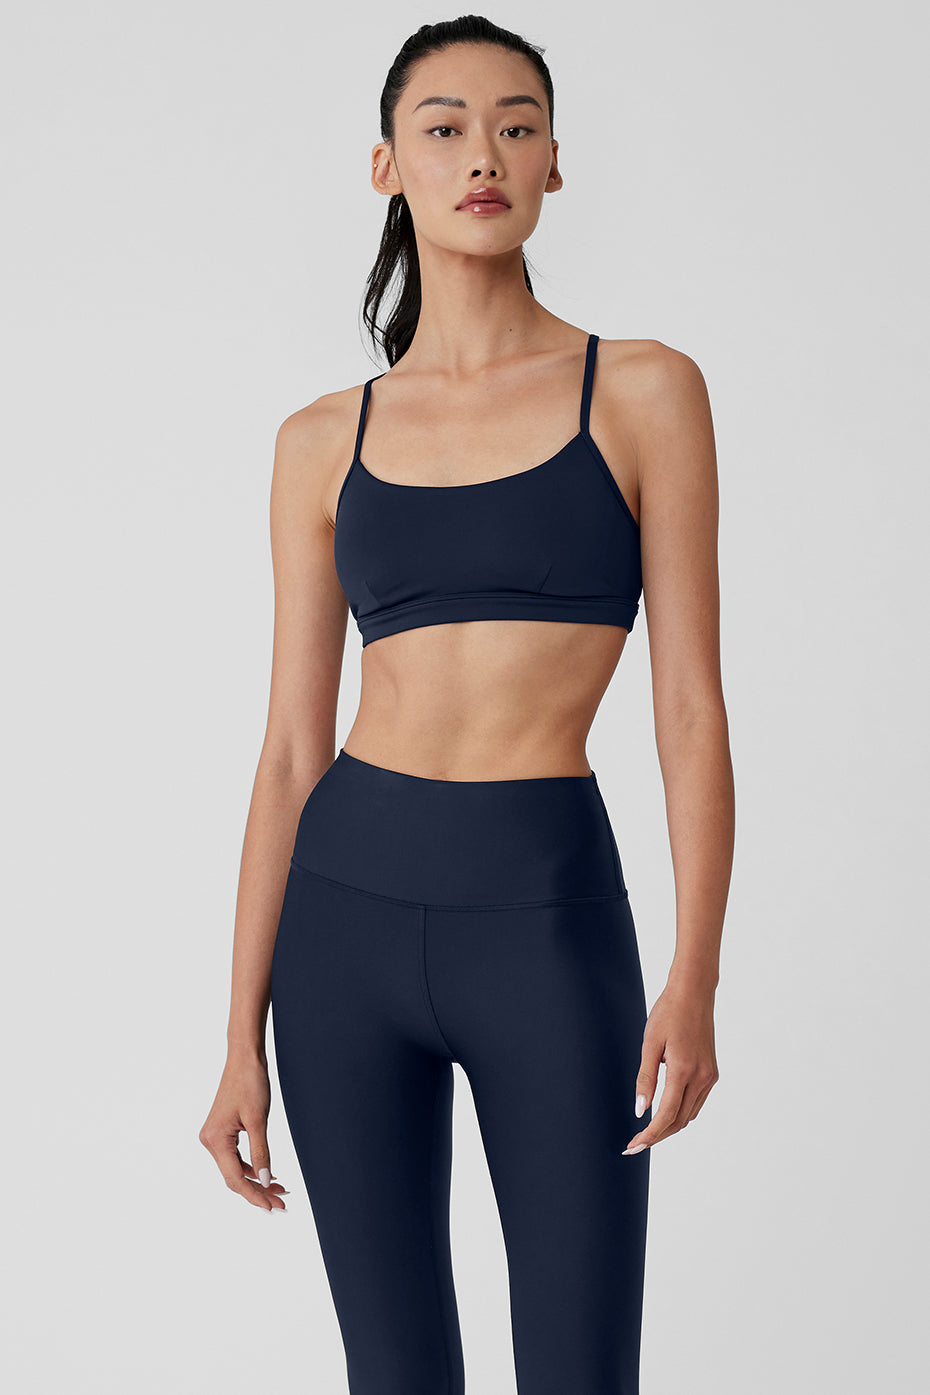 Airlift Suit Up Bra in Steel Blue by Alo Yoga - Work Well Daily